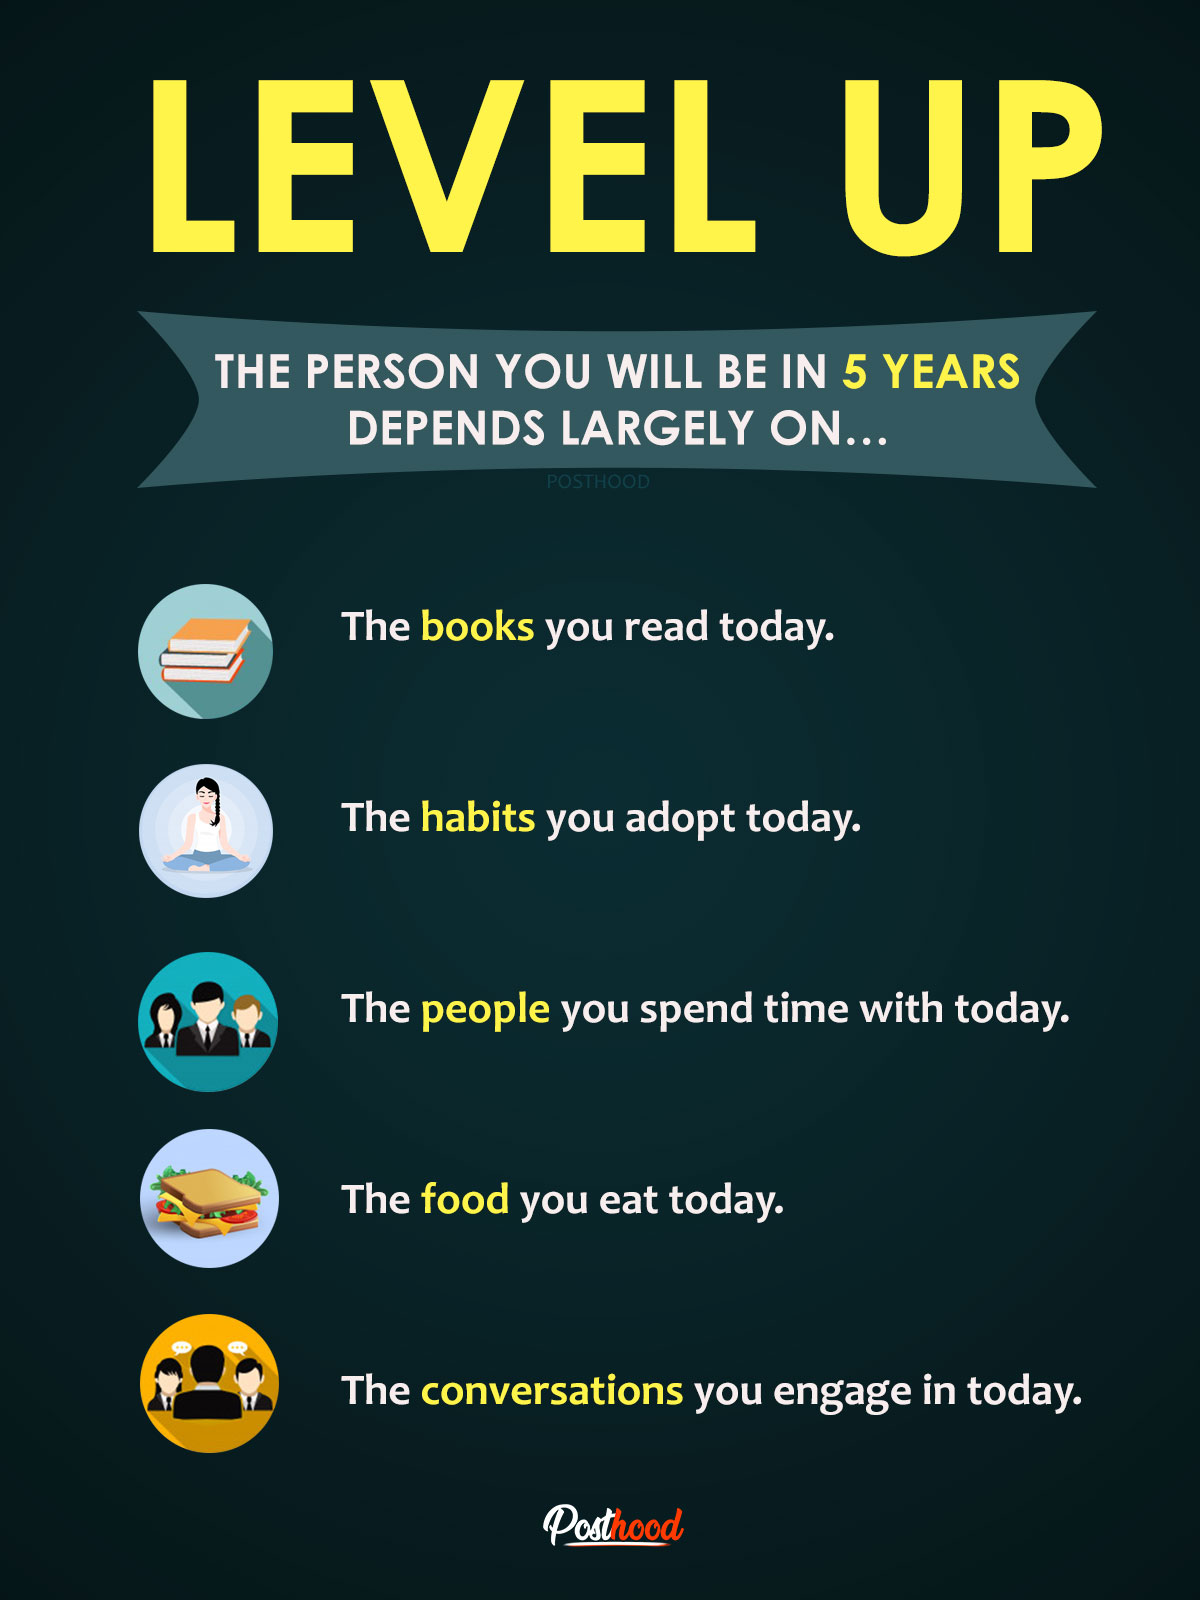 Level up yourself with these habits you must develop today. Best habits for a successful life.